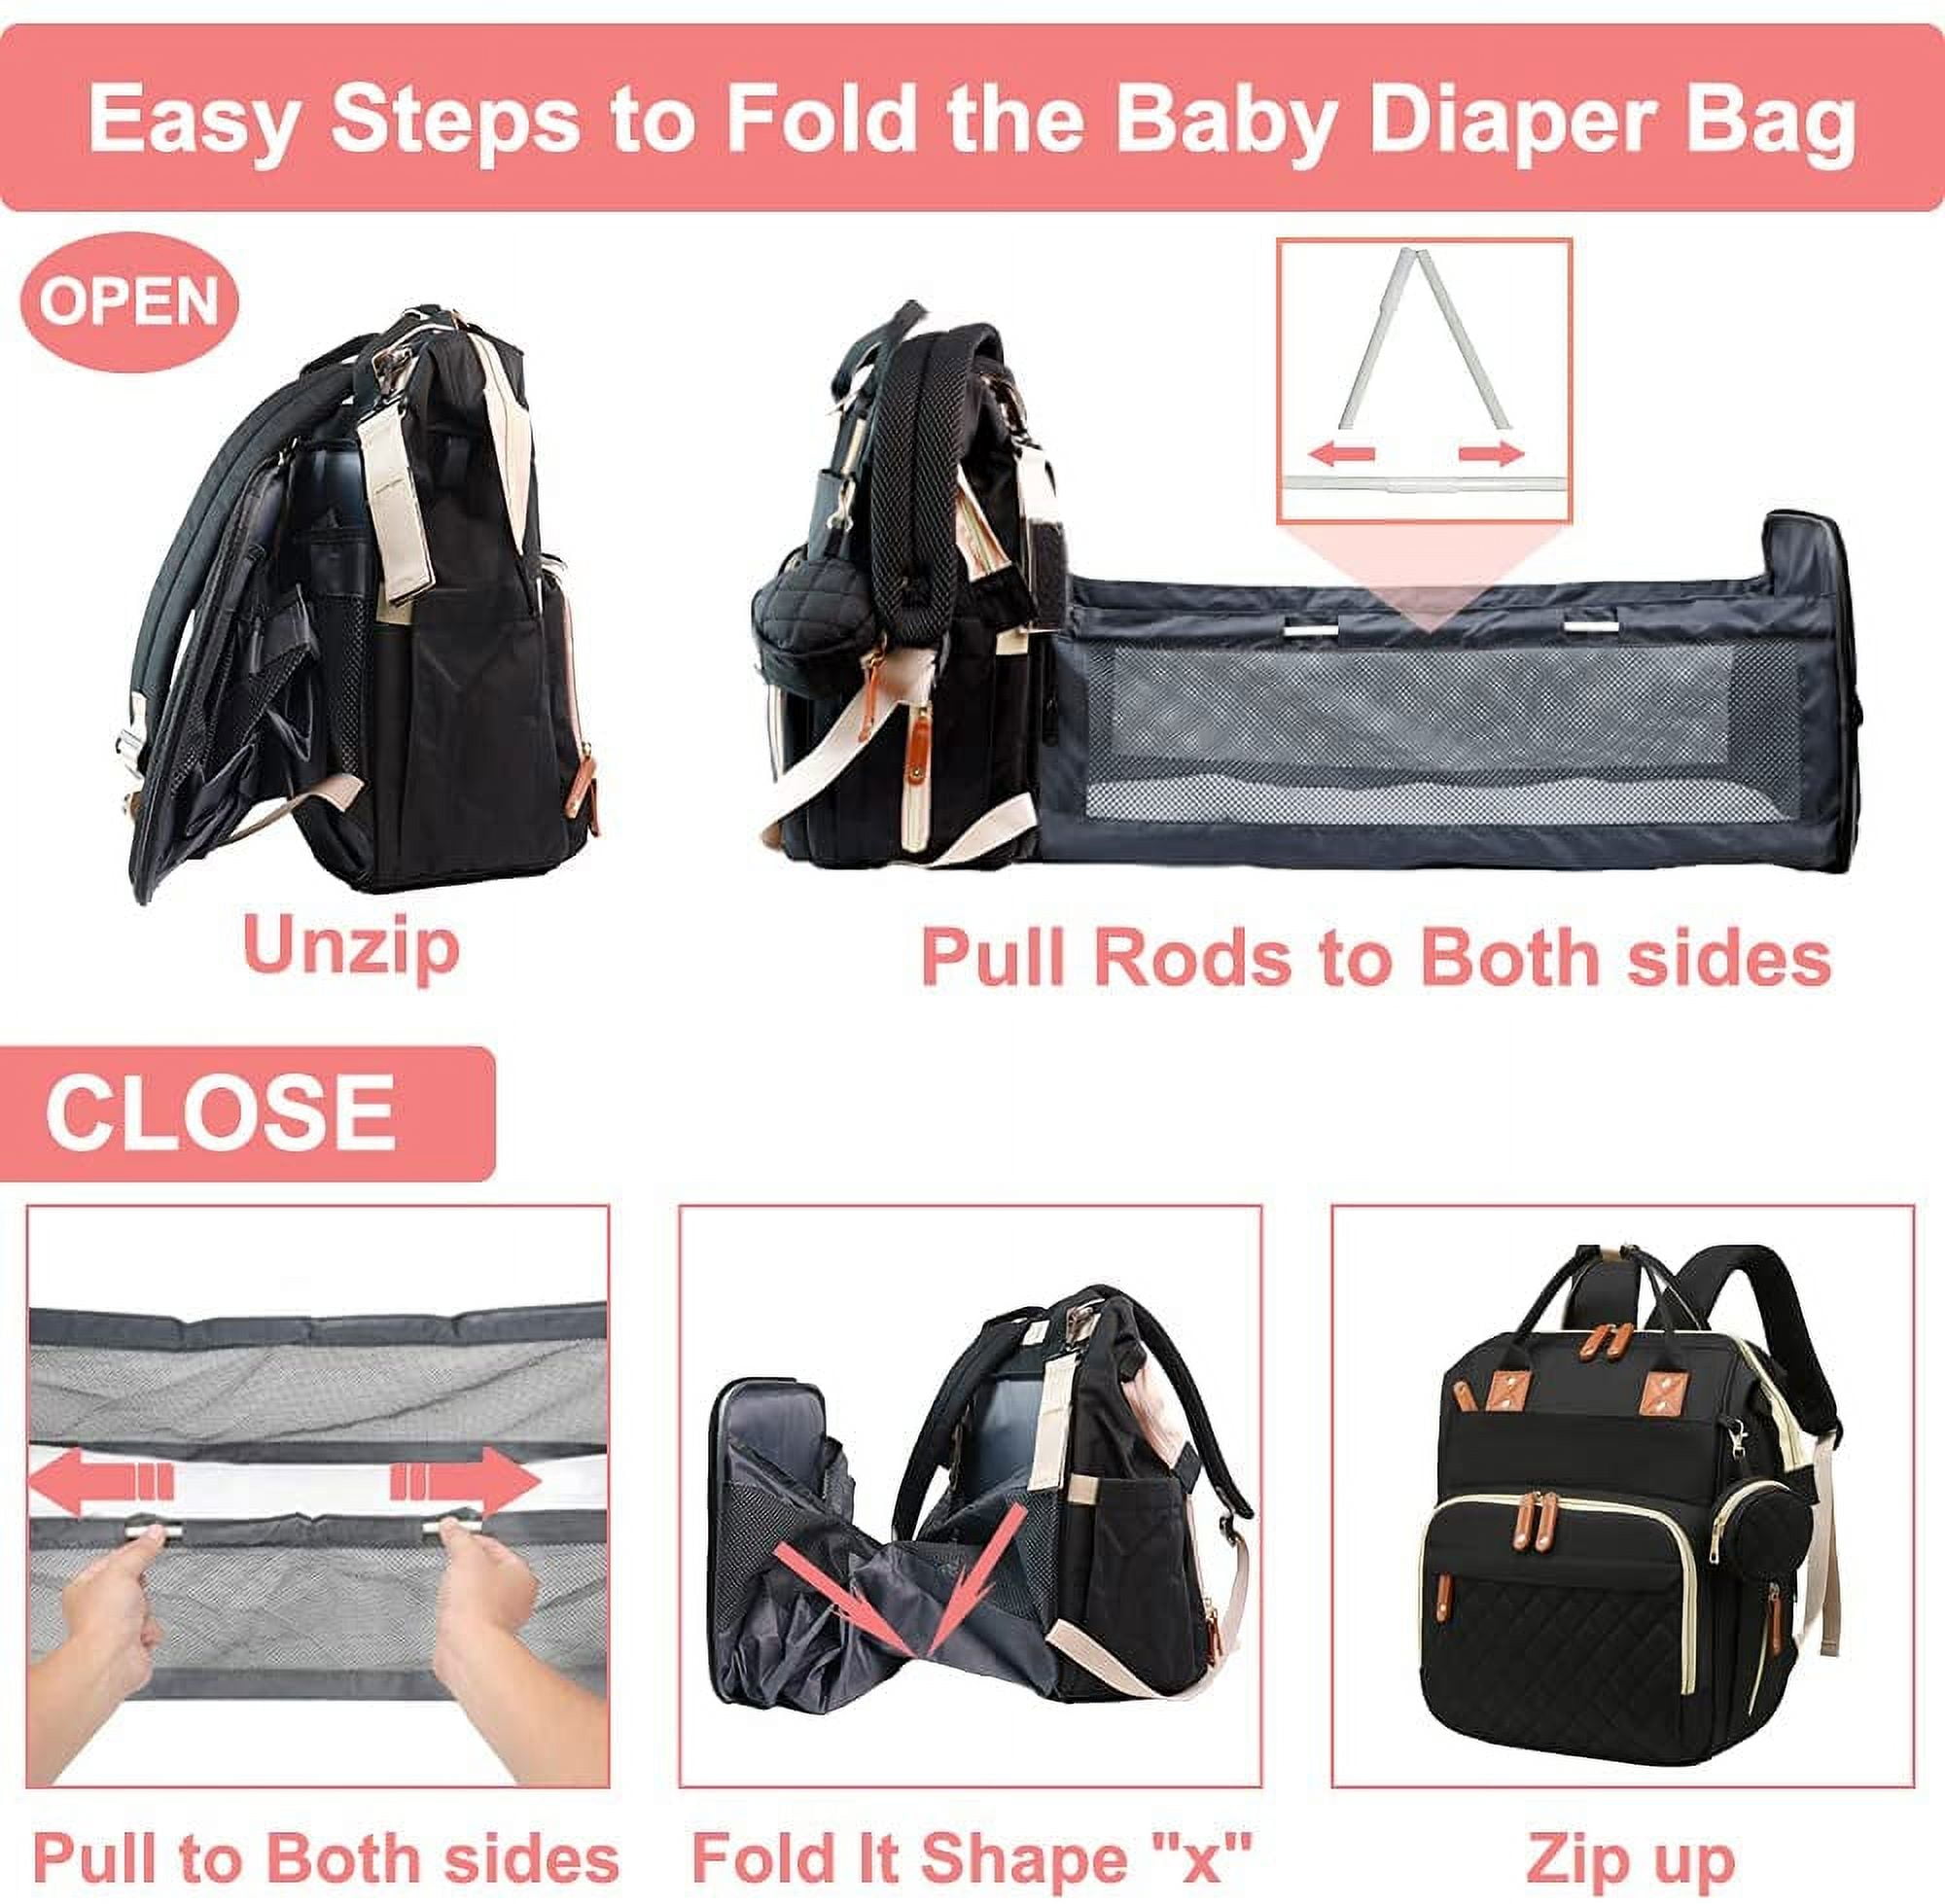 YAYAG Stylish Diaper Bag Backpack for Moms - Travel Essentials & Baby Care  Organizer with Insulated Bottle Pockets, Detachable Shoulder Strap, Newborn